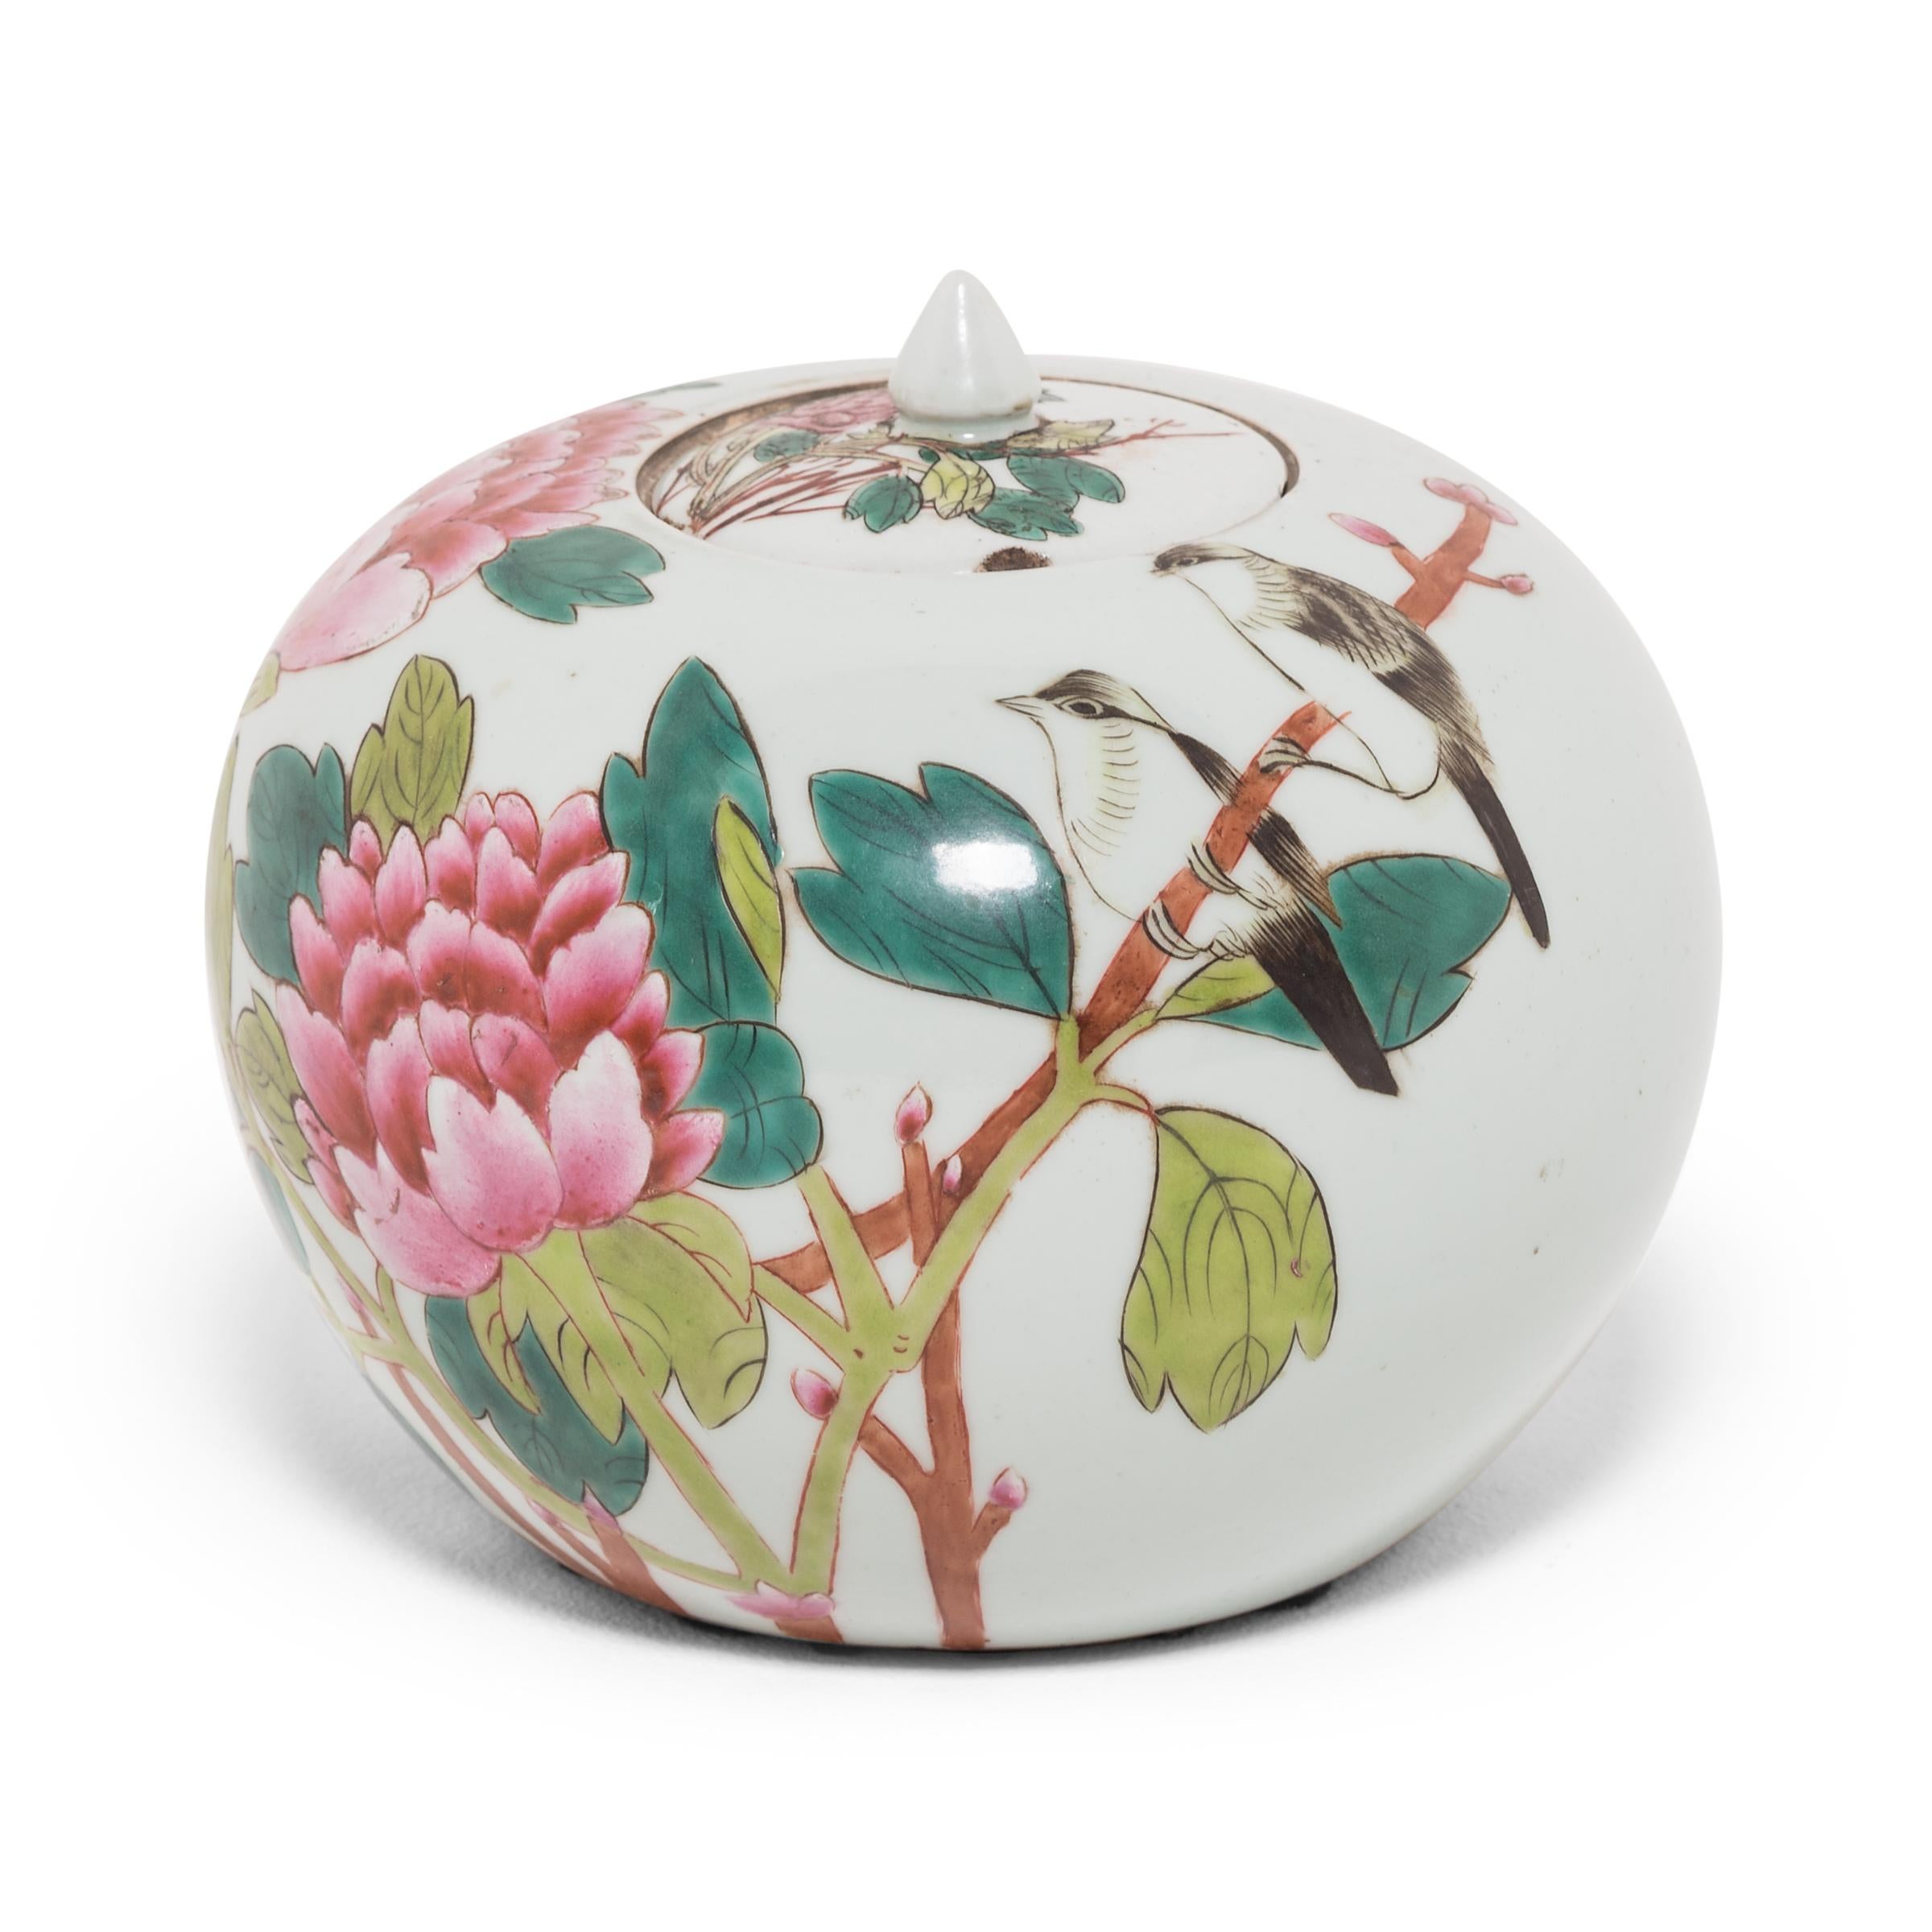 This early 20th century ginger jar features rounded sides and high shoulders that curve in towards a narrow mouth. Painted with expressive brushwork, the jar is festooned with pink peony blossoms, emblems of springtime, love, and affection. Two